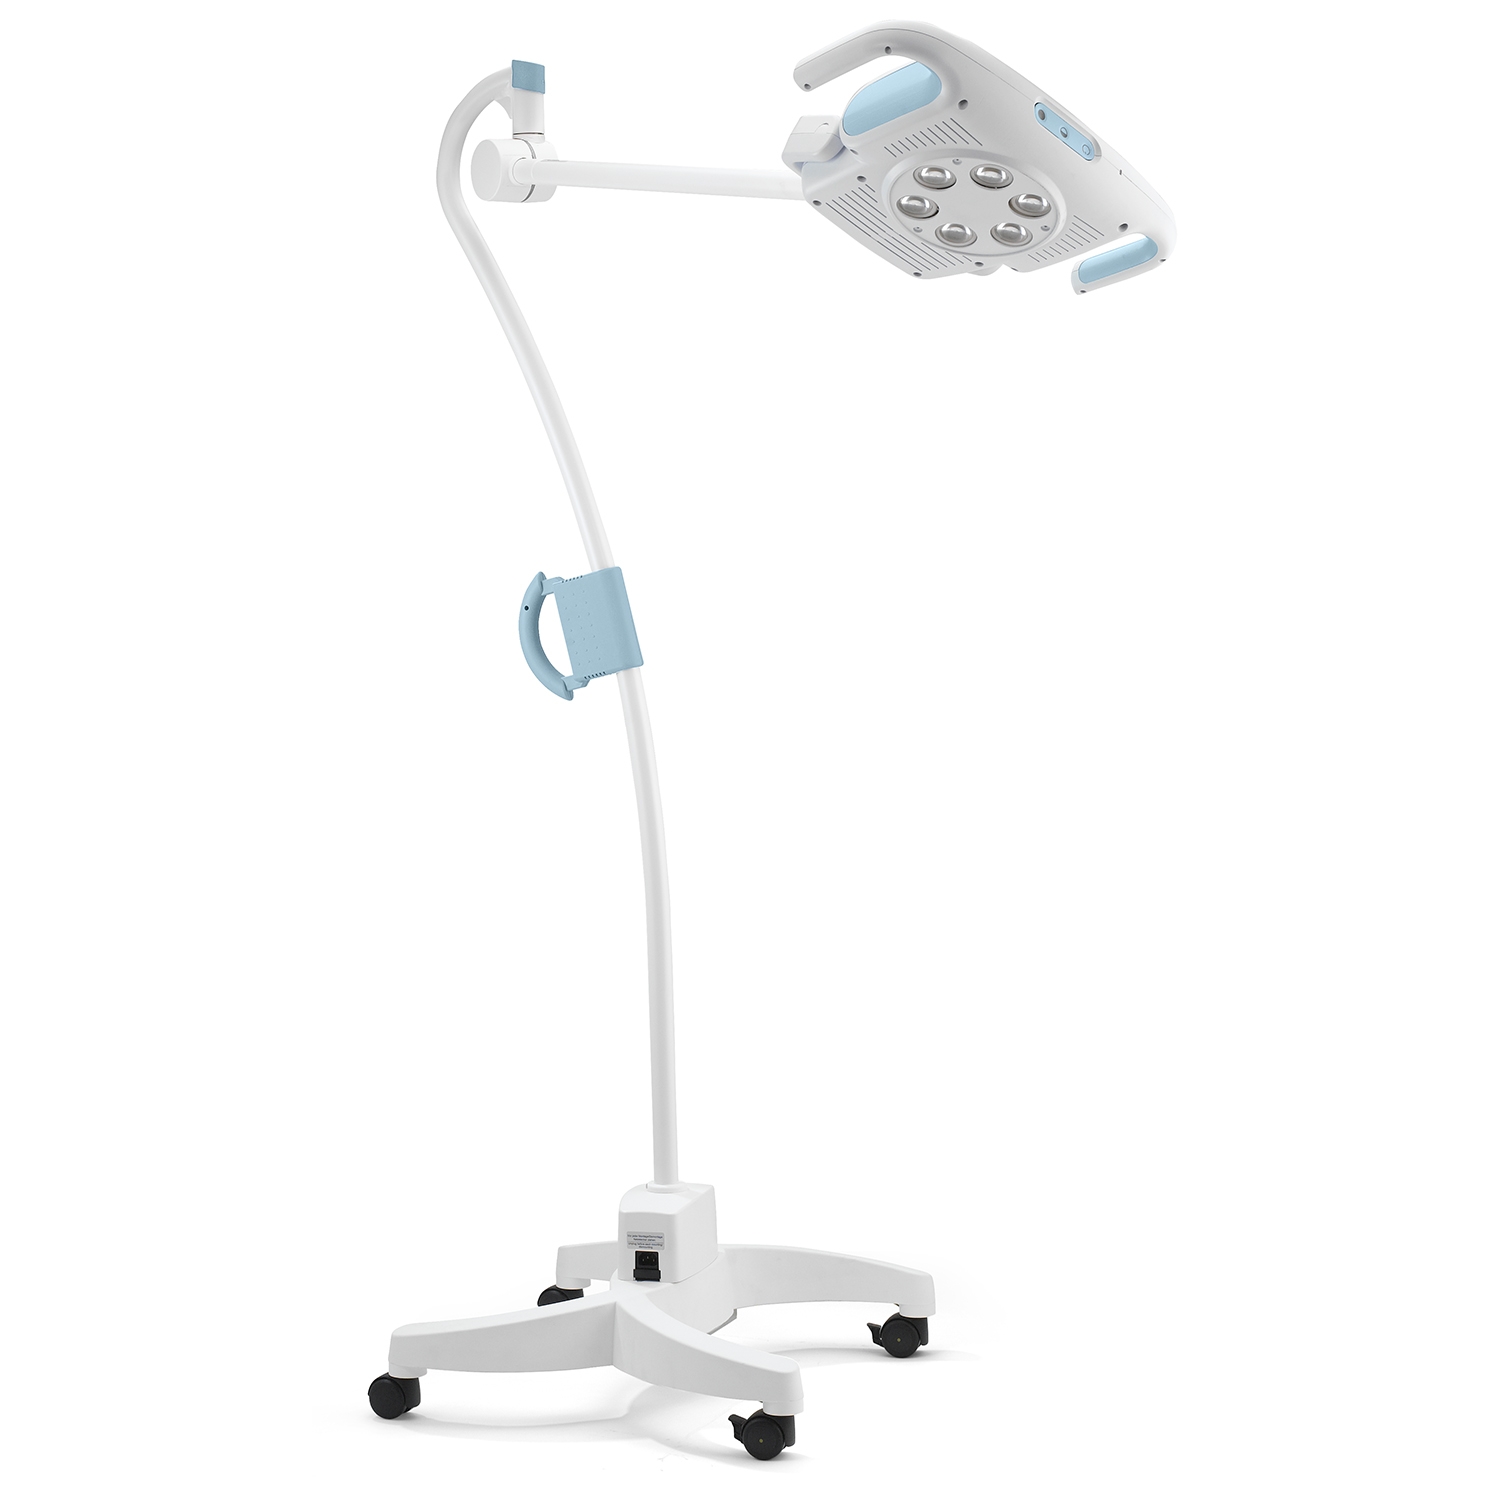 Welch Allyn lampe d'examen GS900 LED + pied roulant